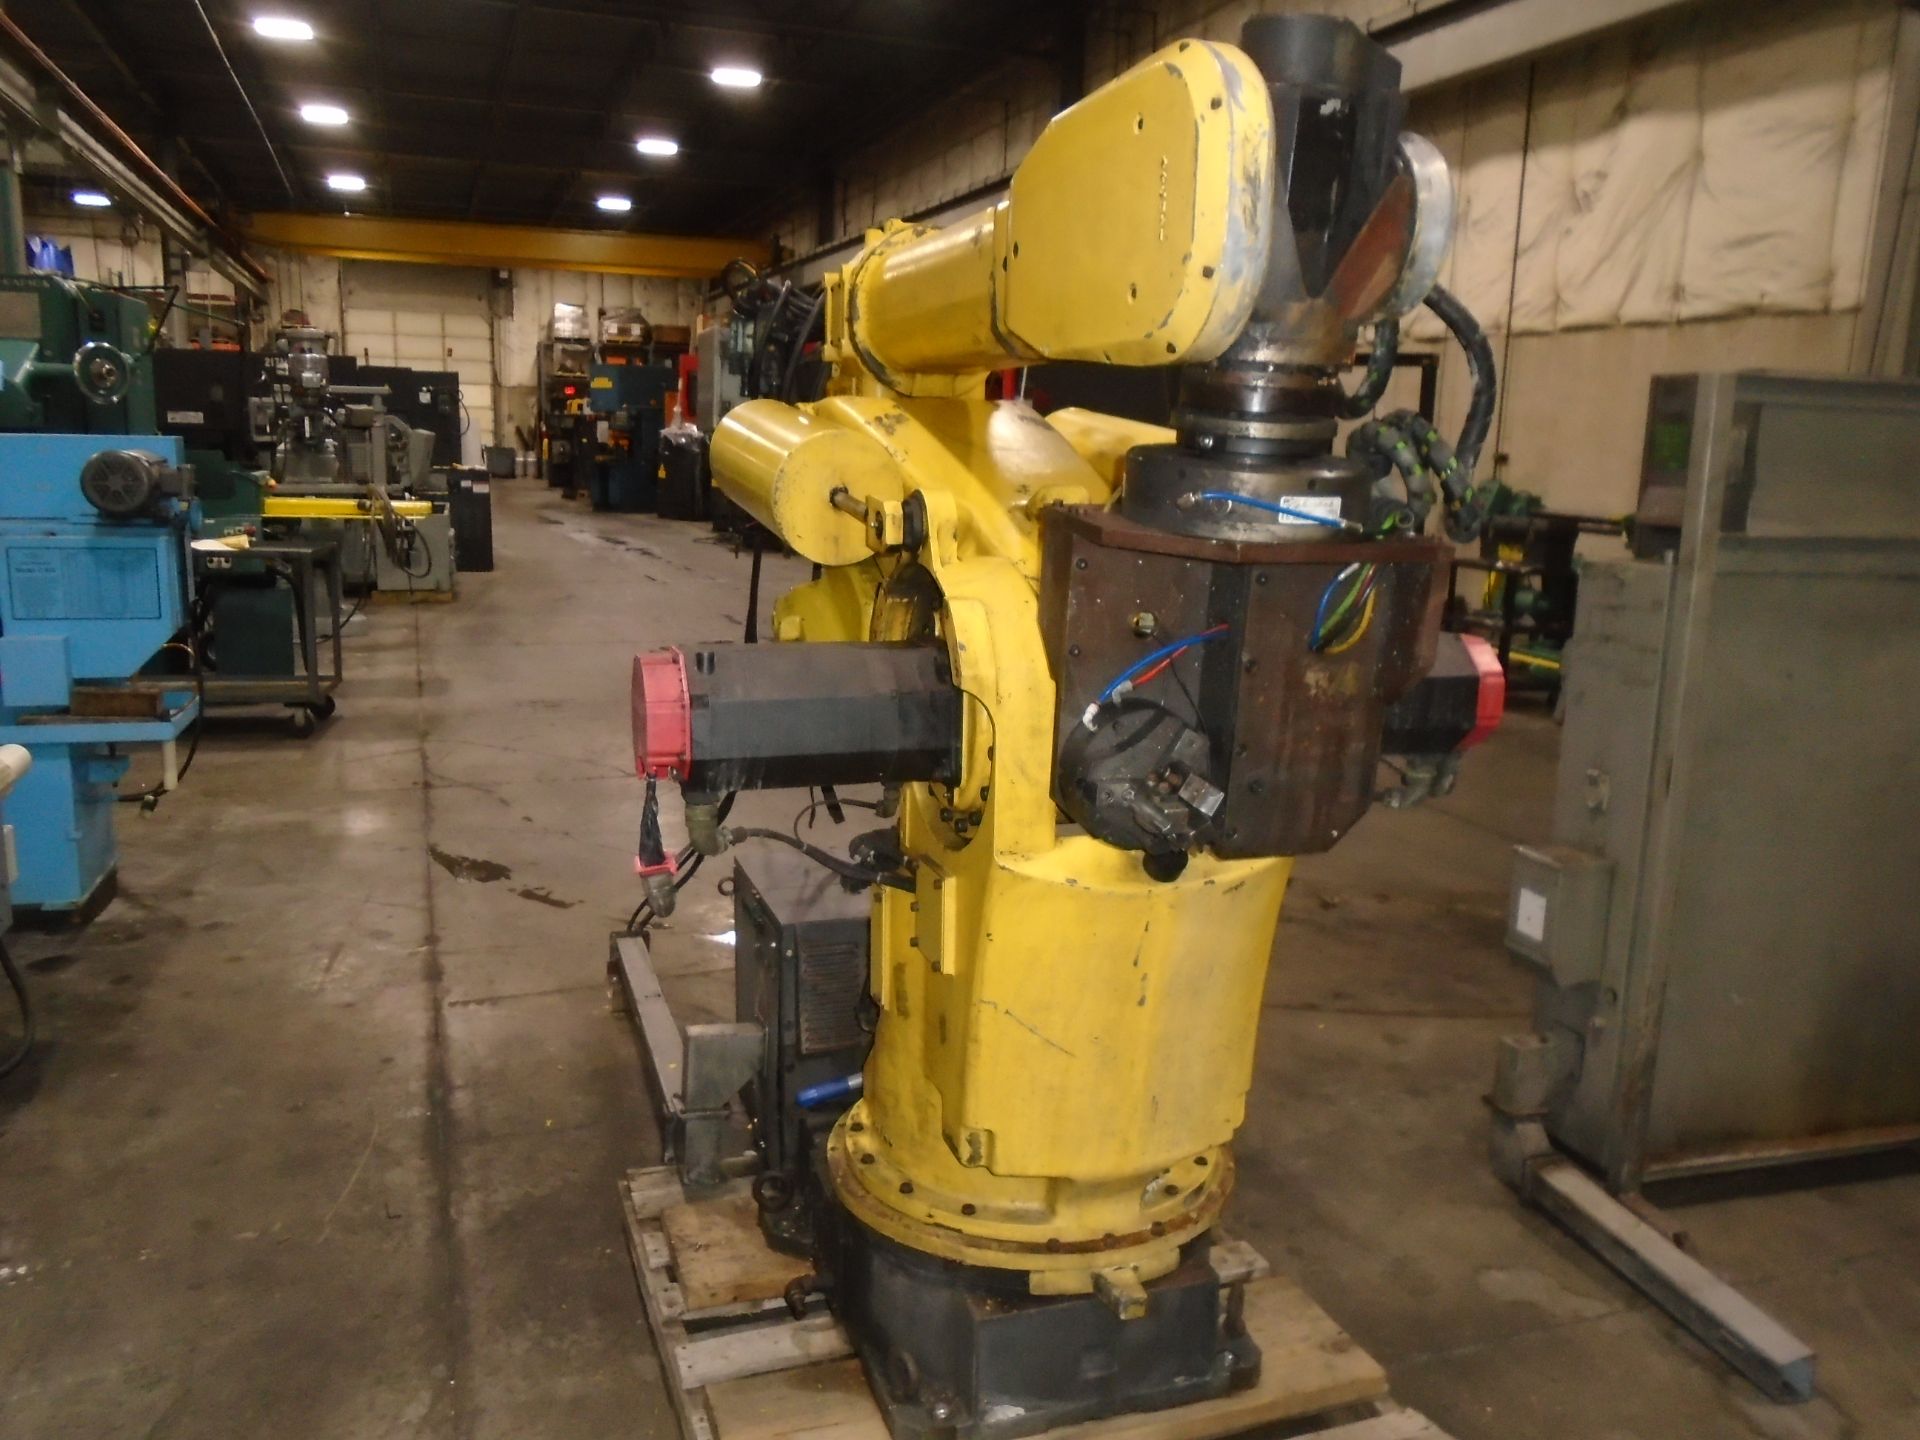 Fanuc S420iF 6 Axis Robot 140 KG Payload RJ2 Controller With Tech Pendent - Image 3 of 10